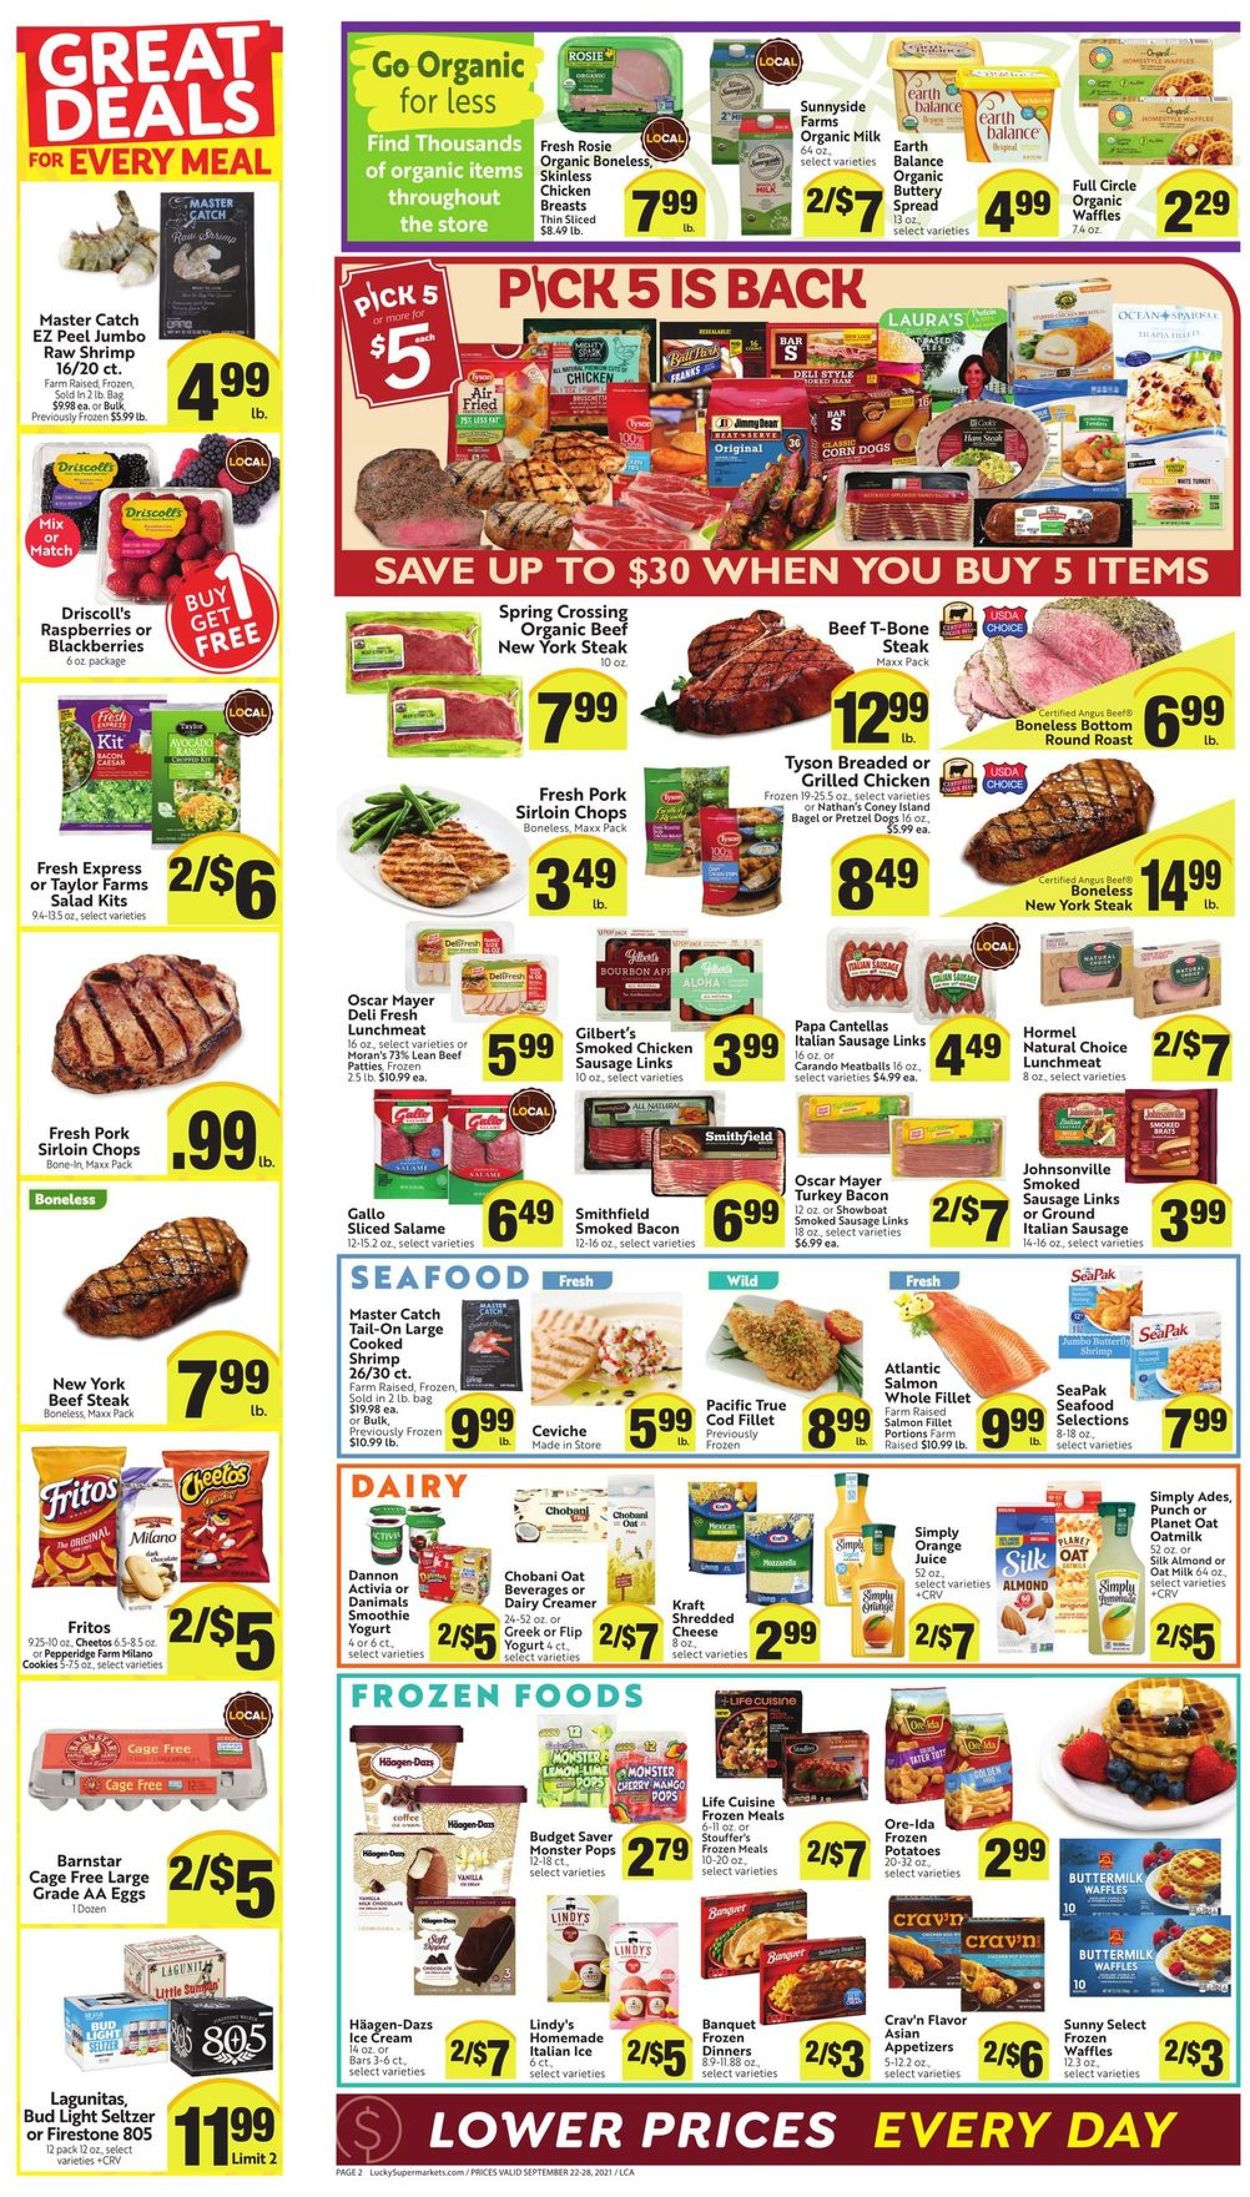 Lucky Supermarkets Weekly Ad Circular - valid 09/22-09/28/2021 (Page 2)